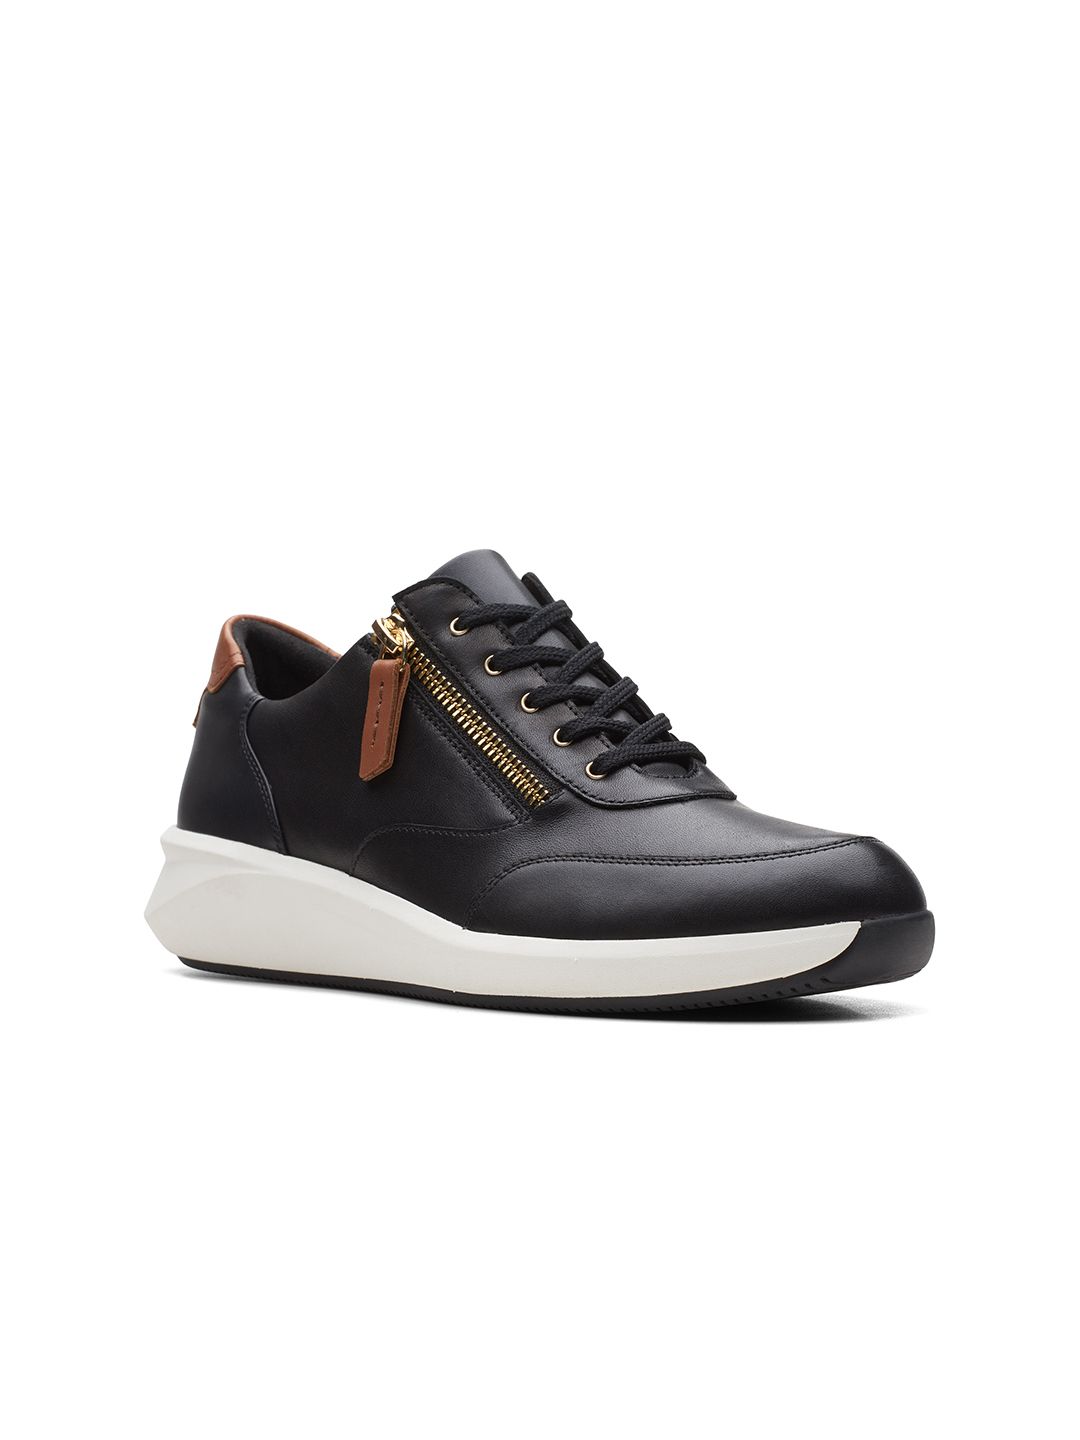 Clarks Women Black Leather Sneakers Price in India